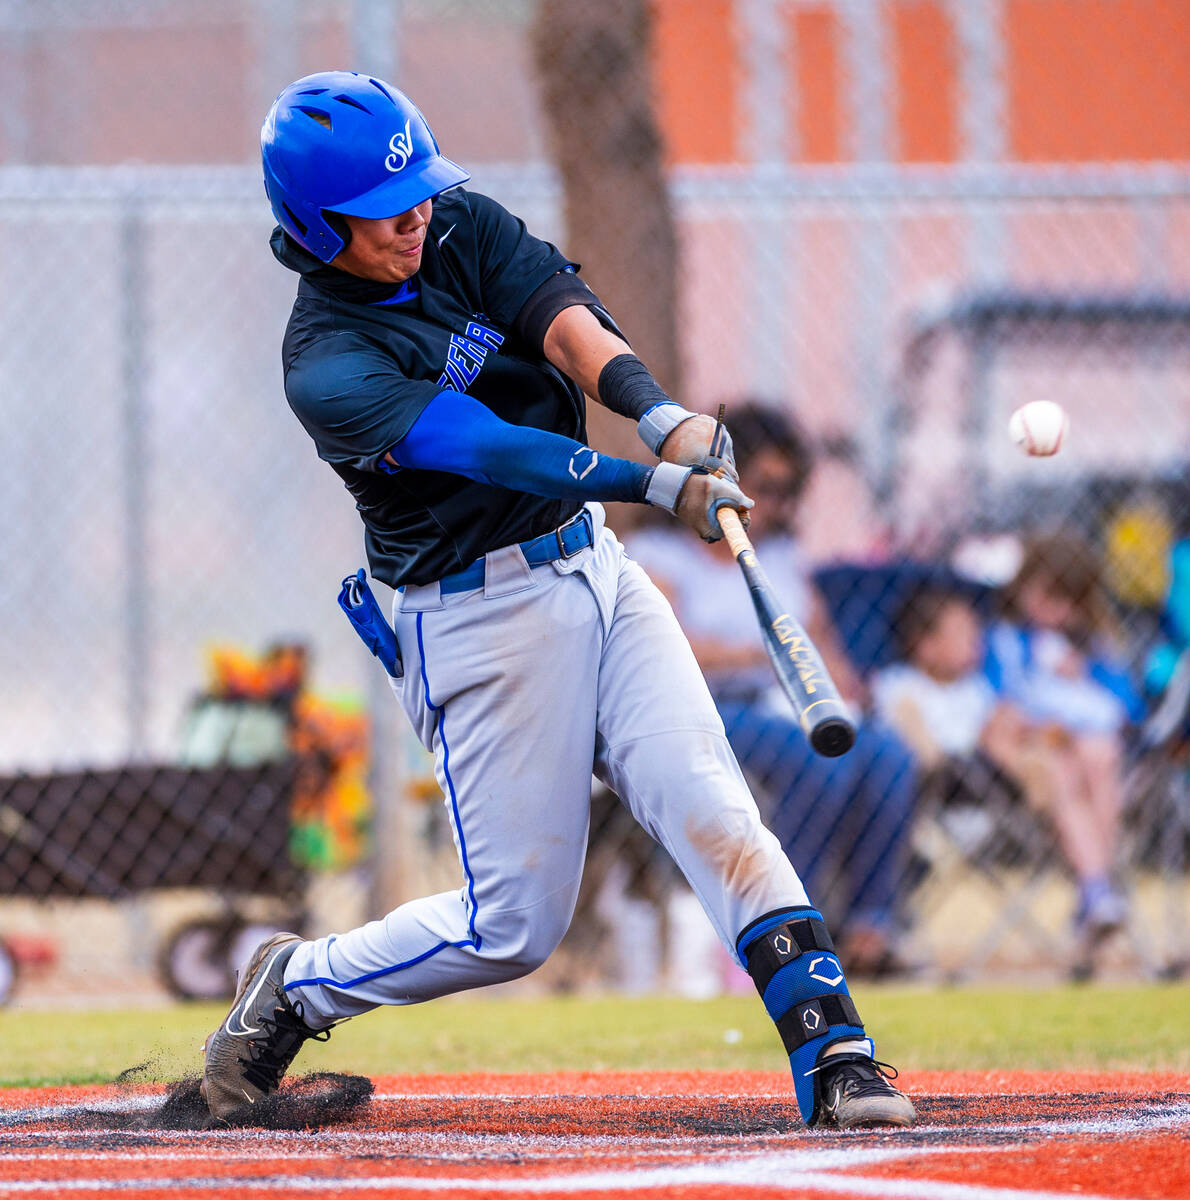 Sierra Vista batter Alex Guevara (8) connects on a throw from a Legacy pitcher during the secon ...